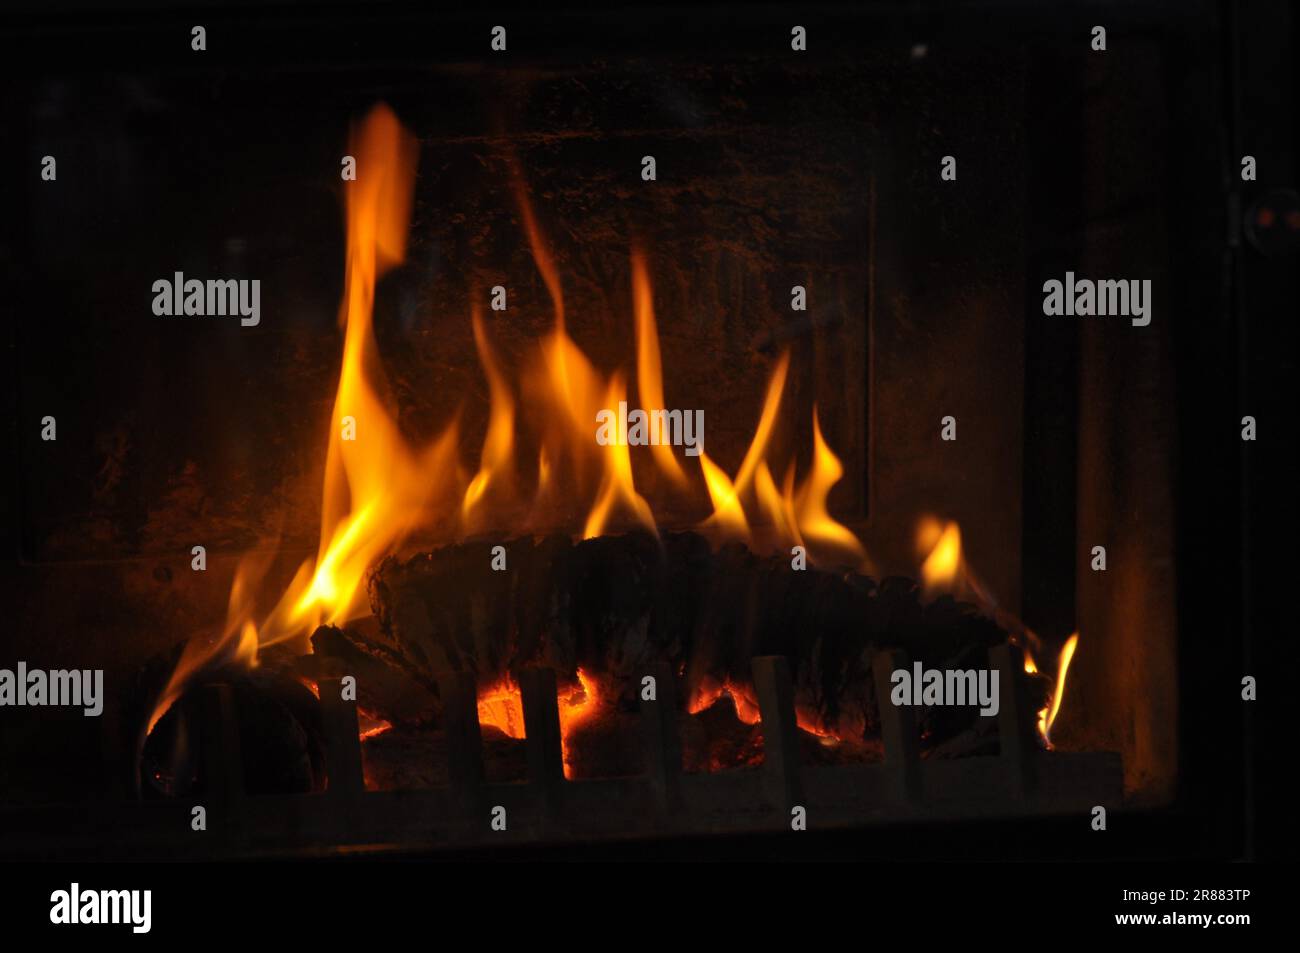 Charcoal Fire Wood Burning Wood And Coal In Fireplace Stock Photo